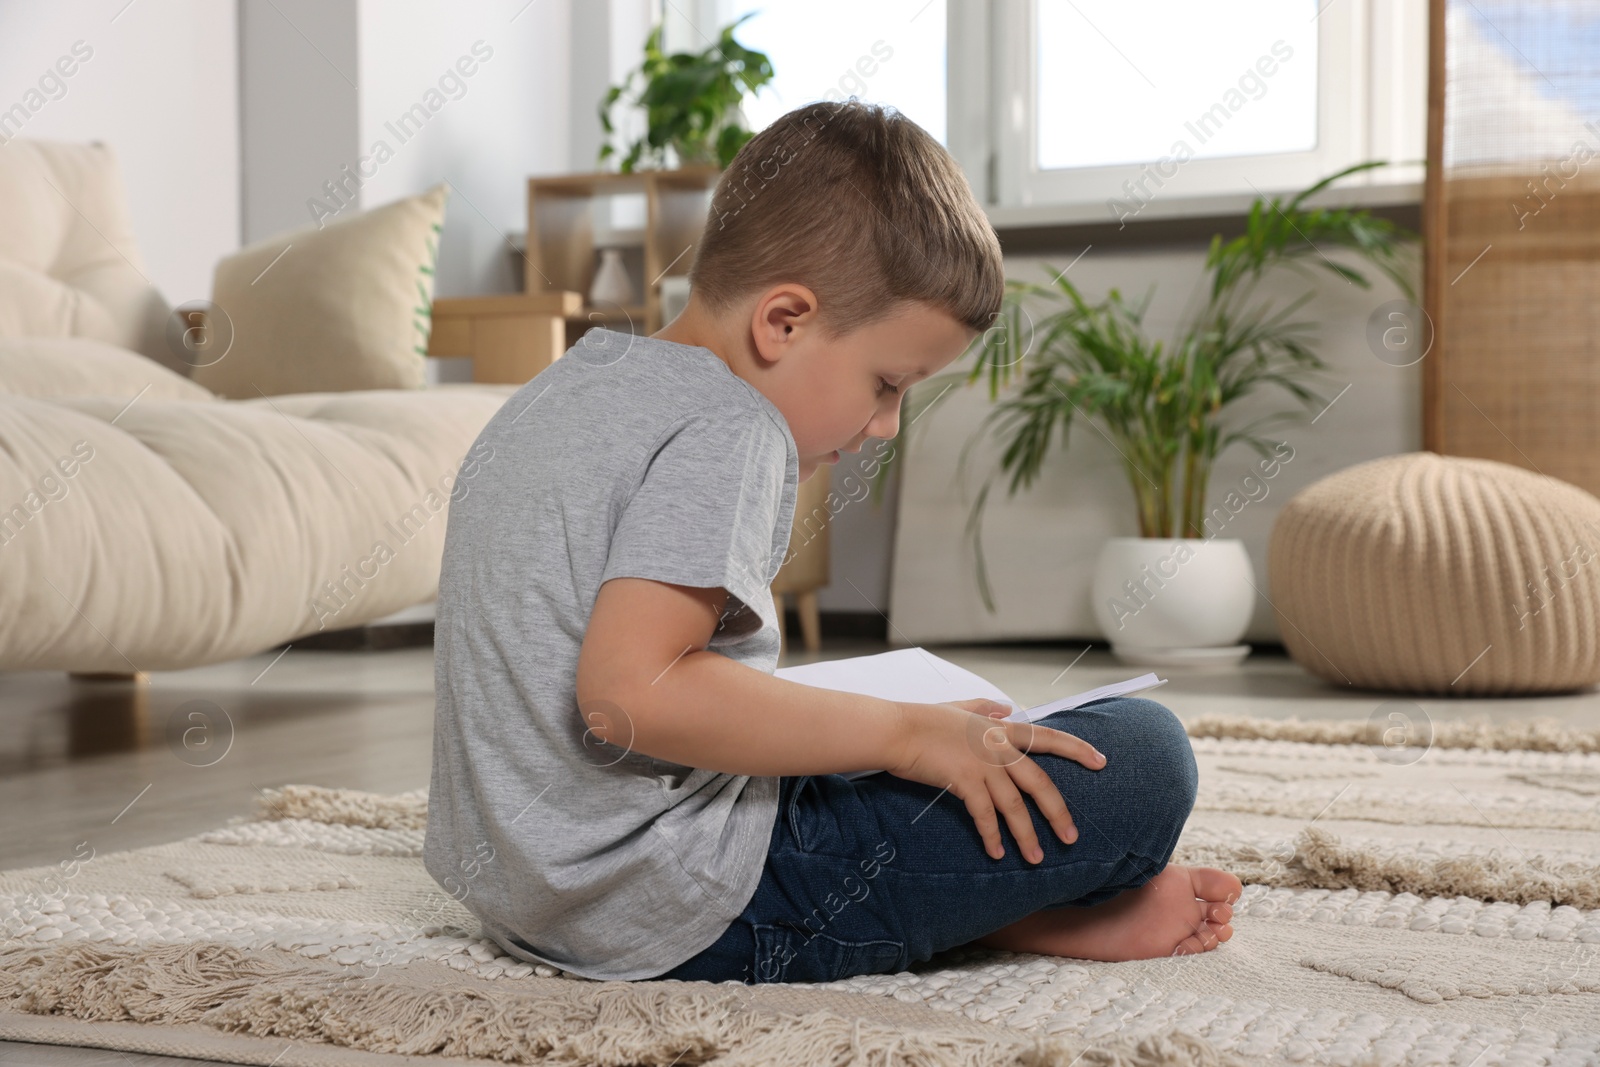 Photo of Boy with poor posture reading book on beige carpet in living room. Symptom of scoliosis